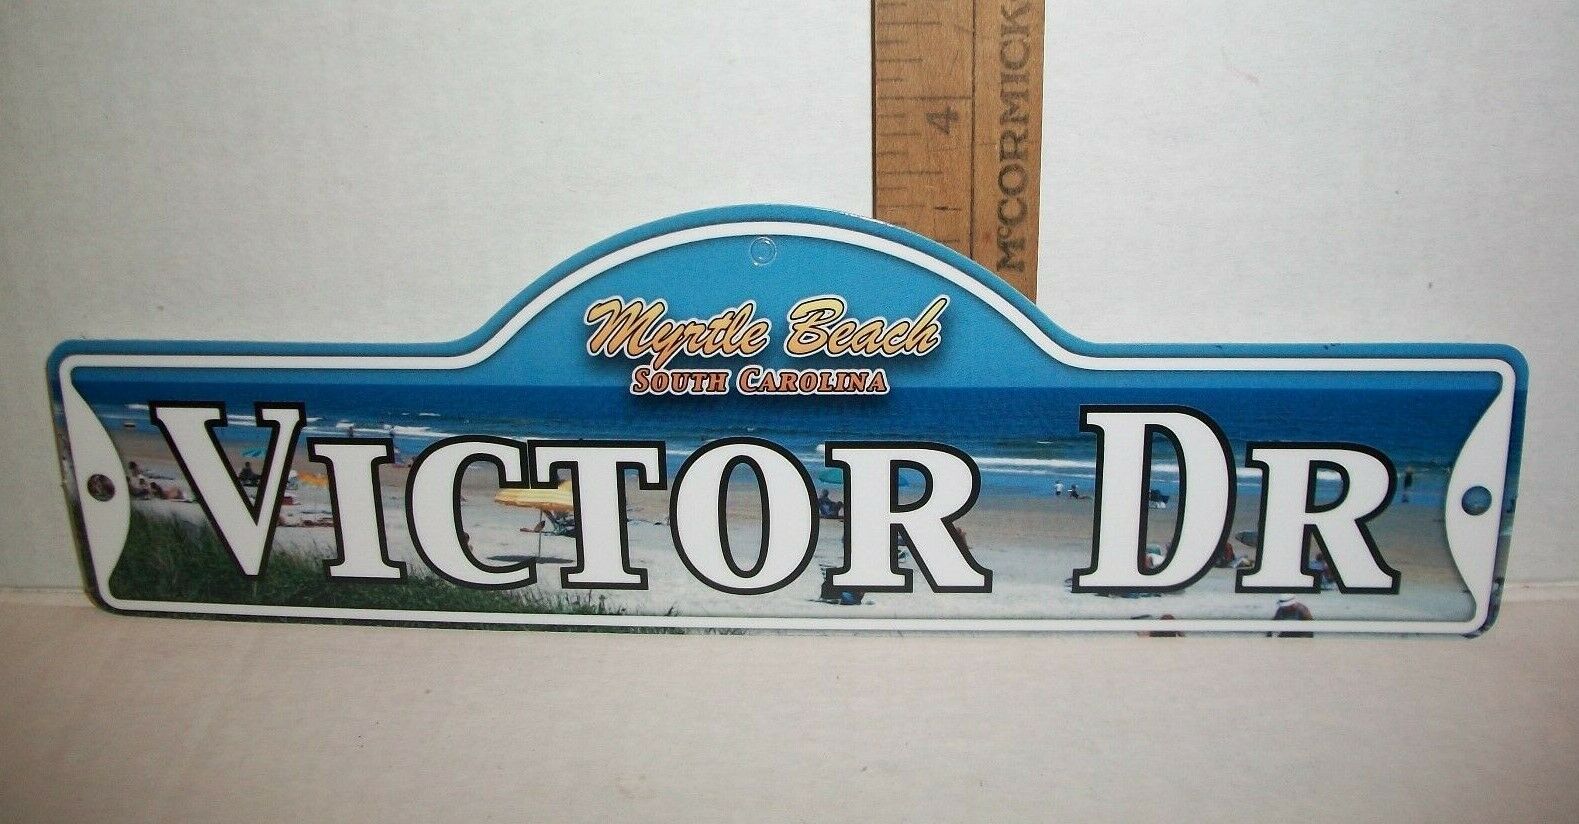 DOOR WALL SCANDICAL MYRTLE BEACH SOUTH CAROLINA NAME ROAD SIGN VICTOR DR